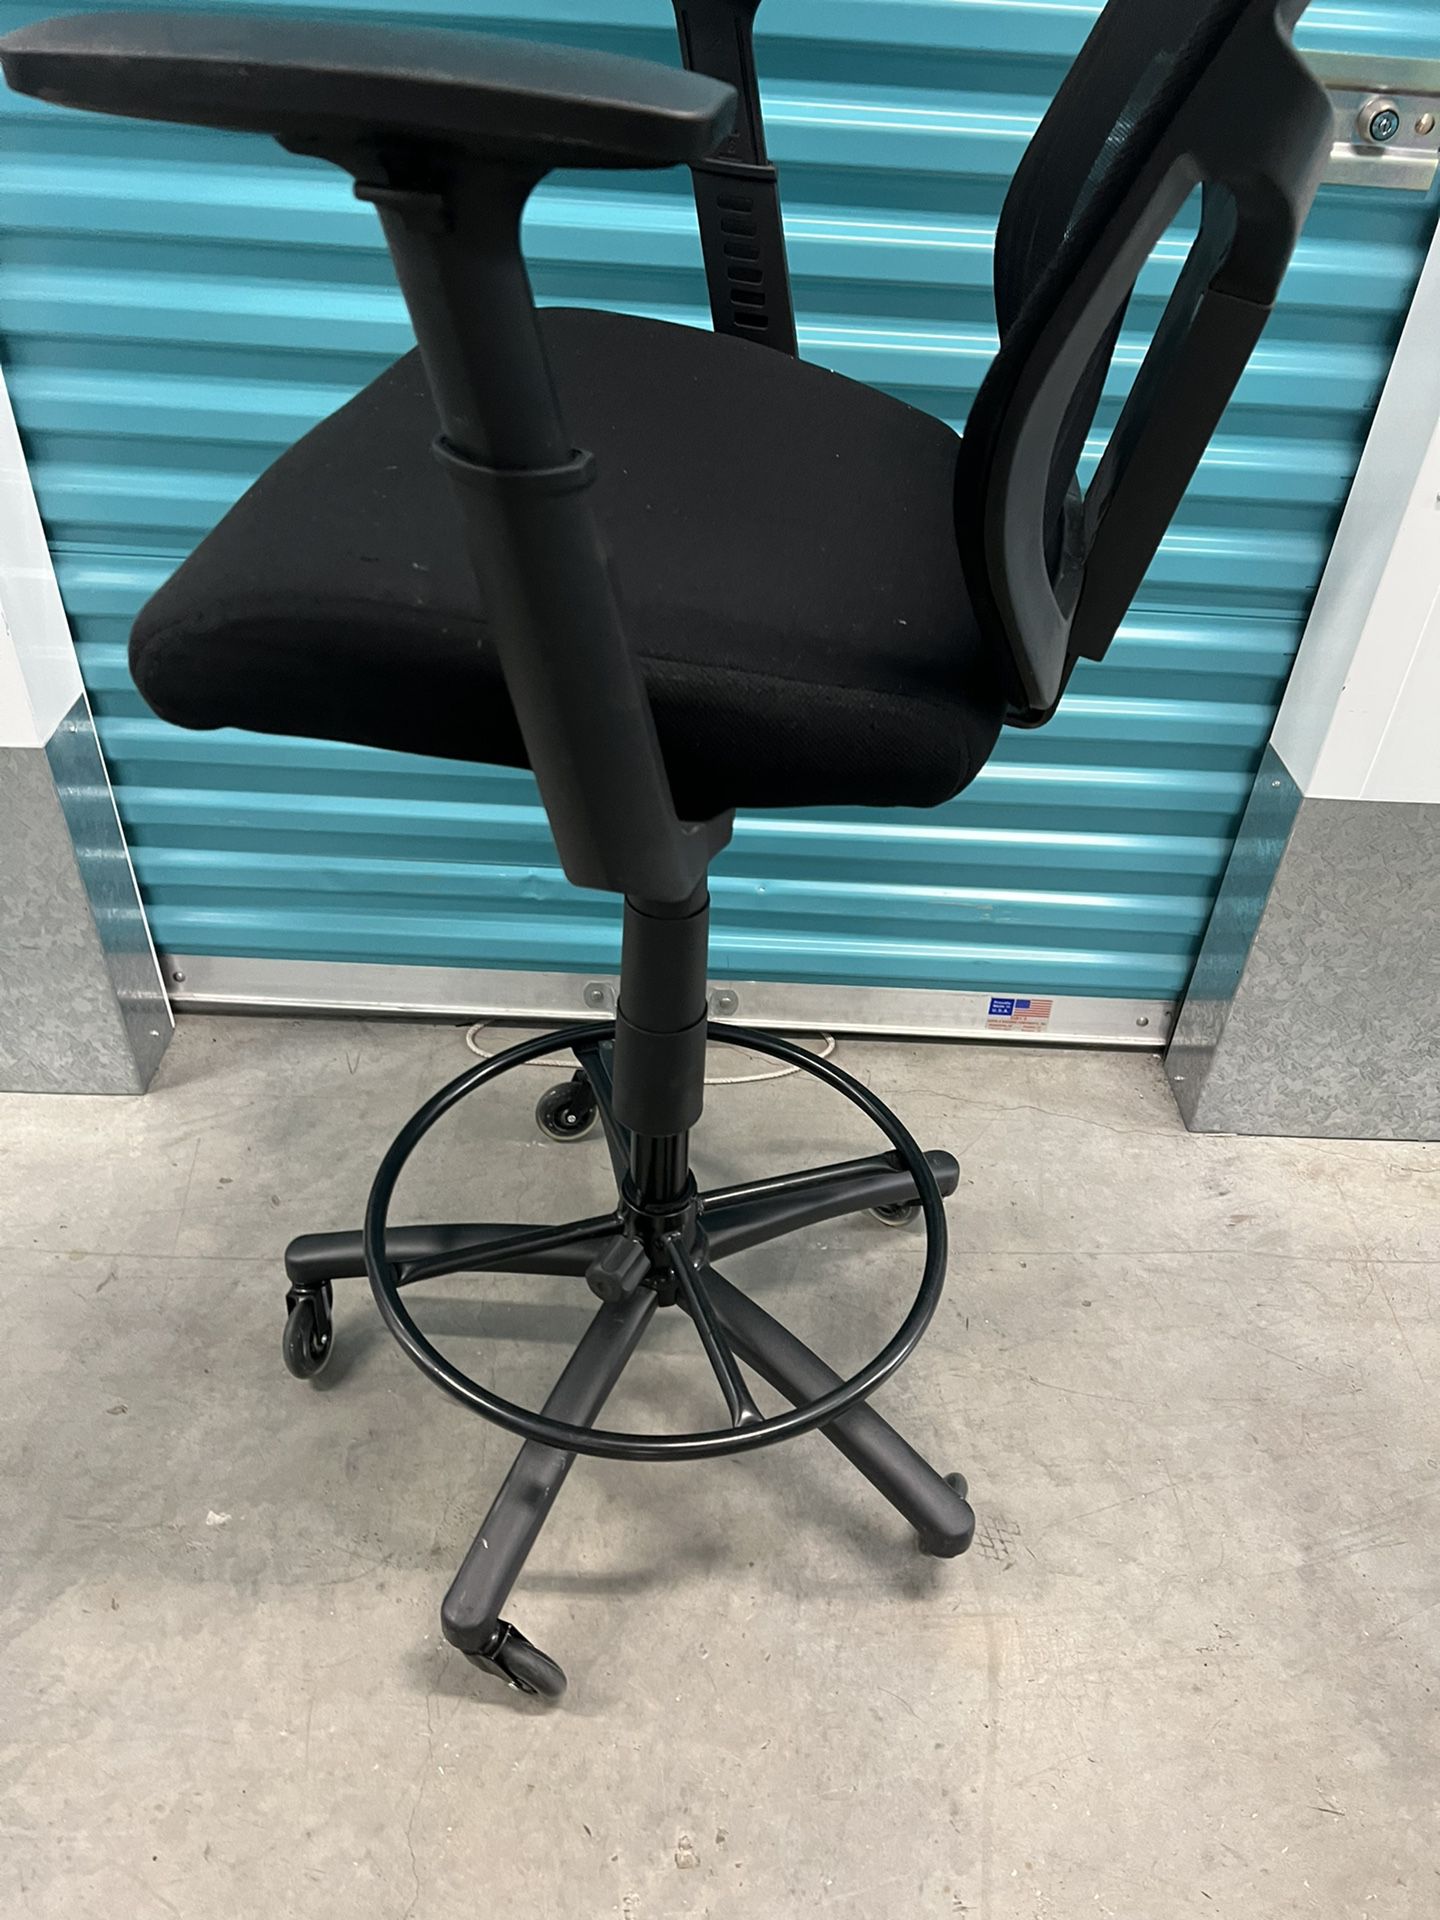 Drafting Chair - Tall Office Chair for Standing Desk, High Work Stool, Counter H